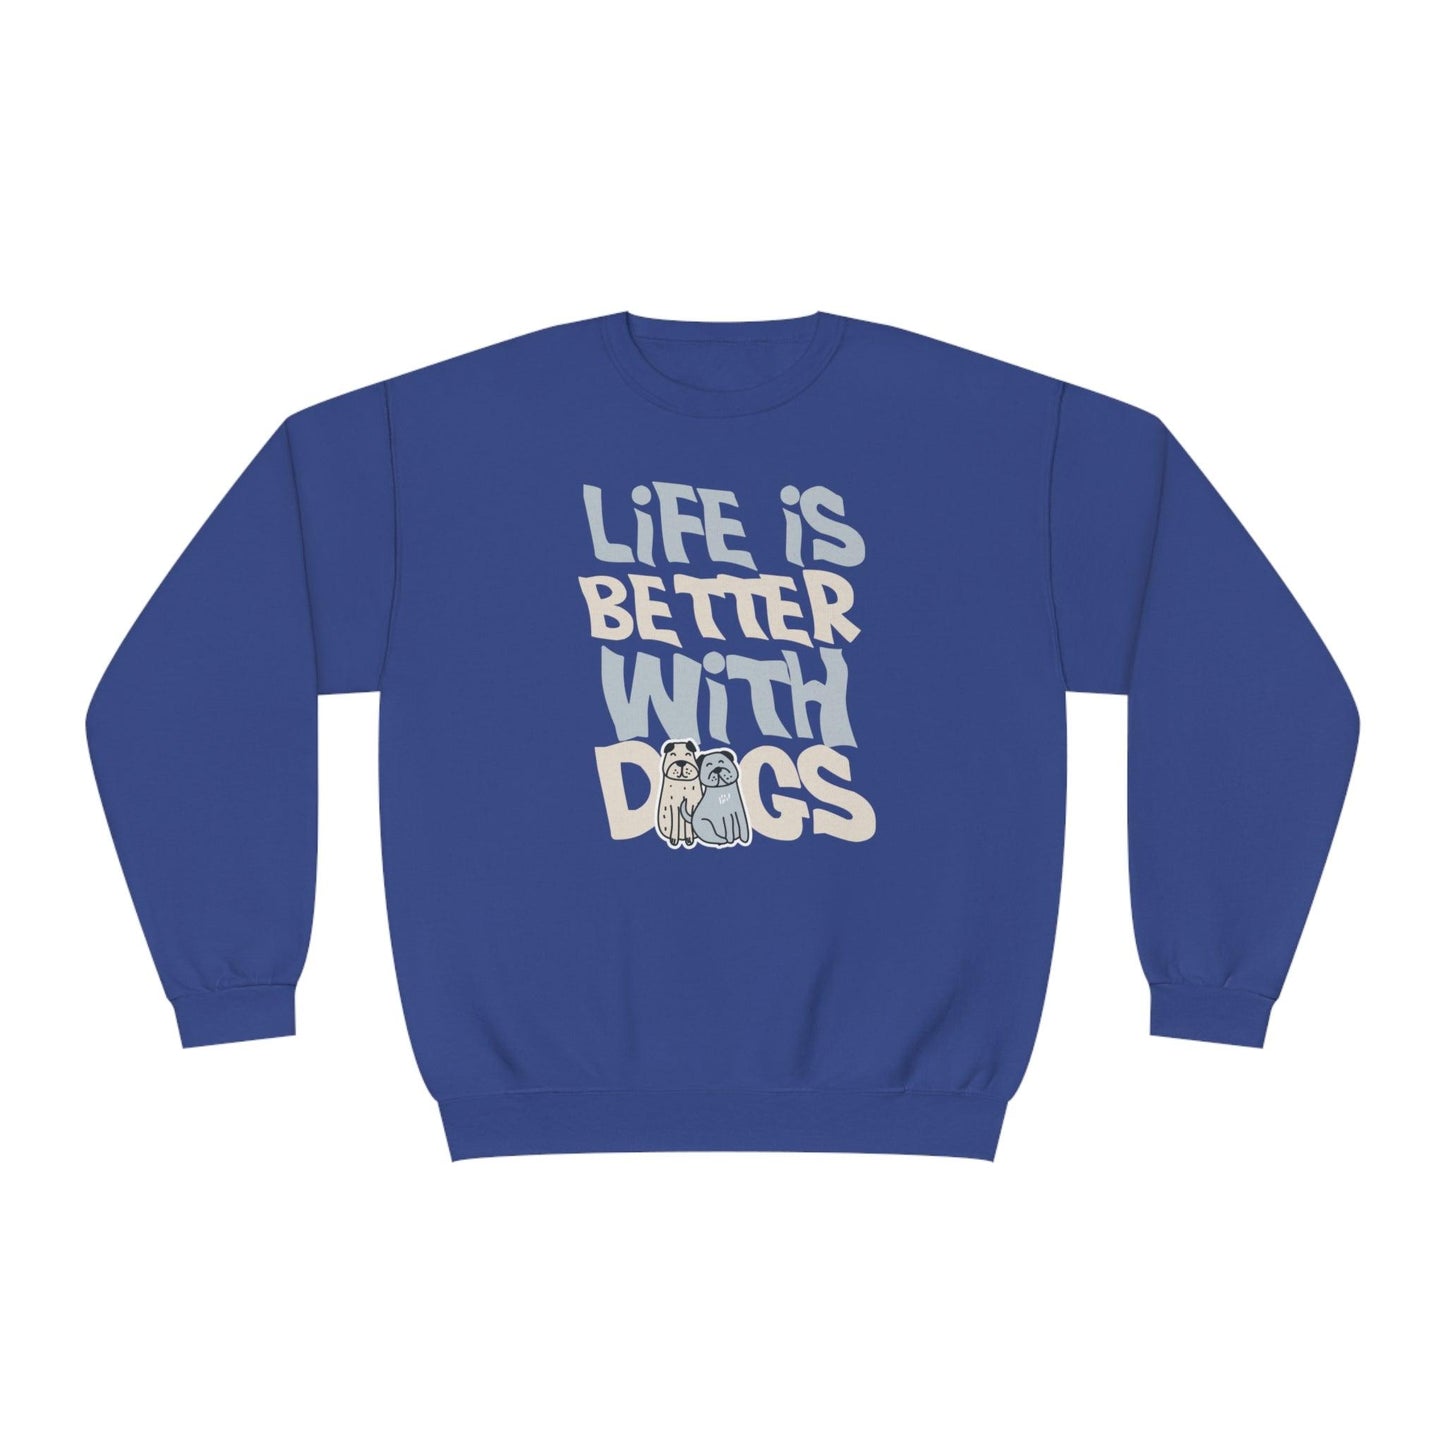 Life is Better With Dogs - NuBlend® Crewneck Sweatshirt - Wicked Naughty Apparel